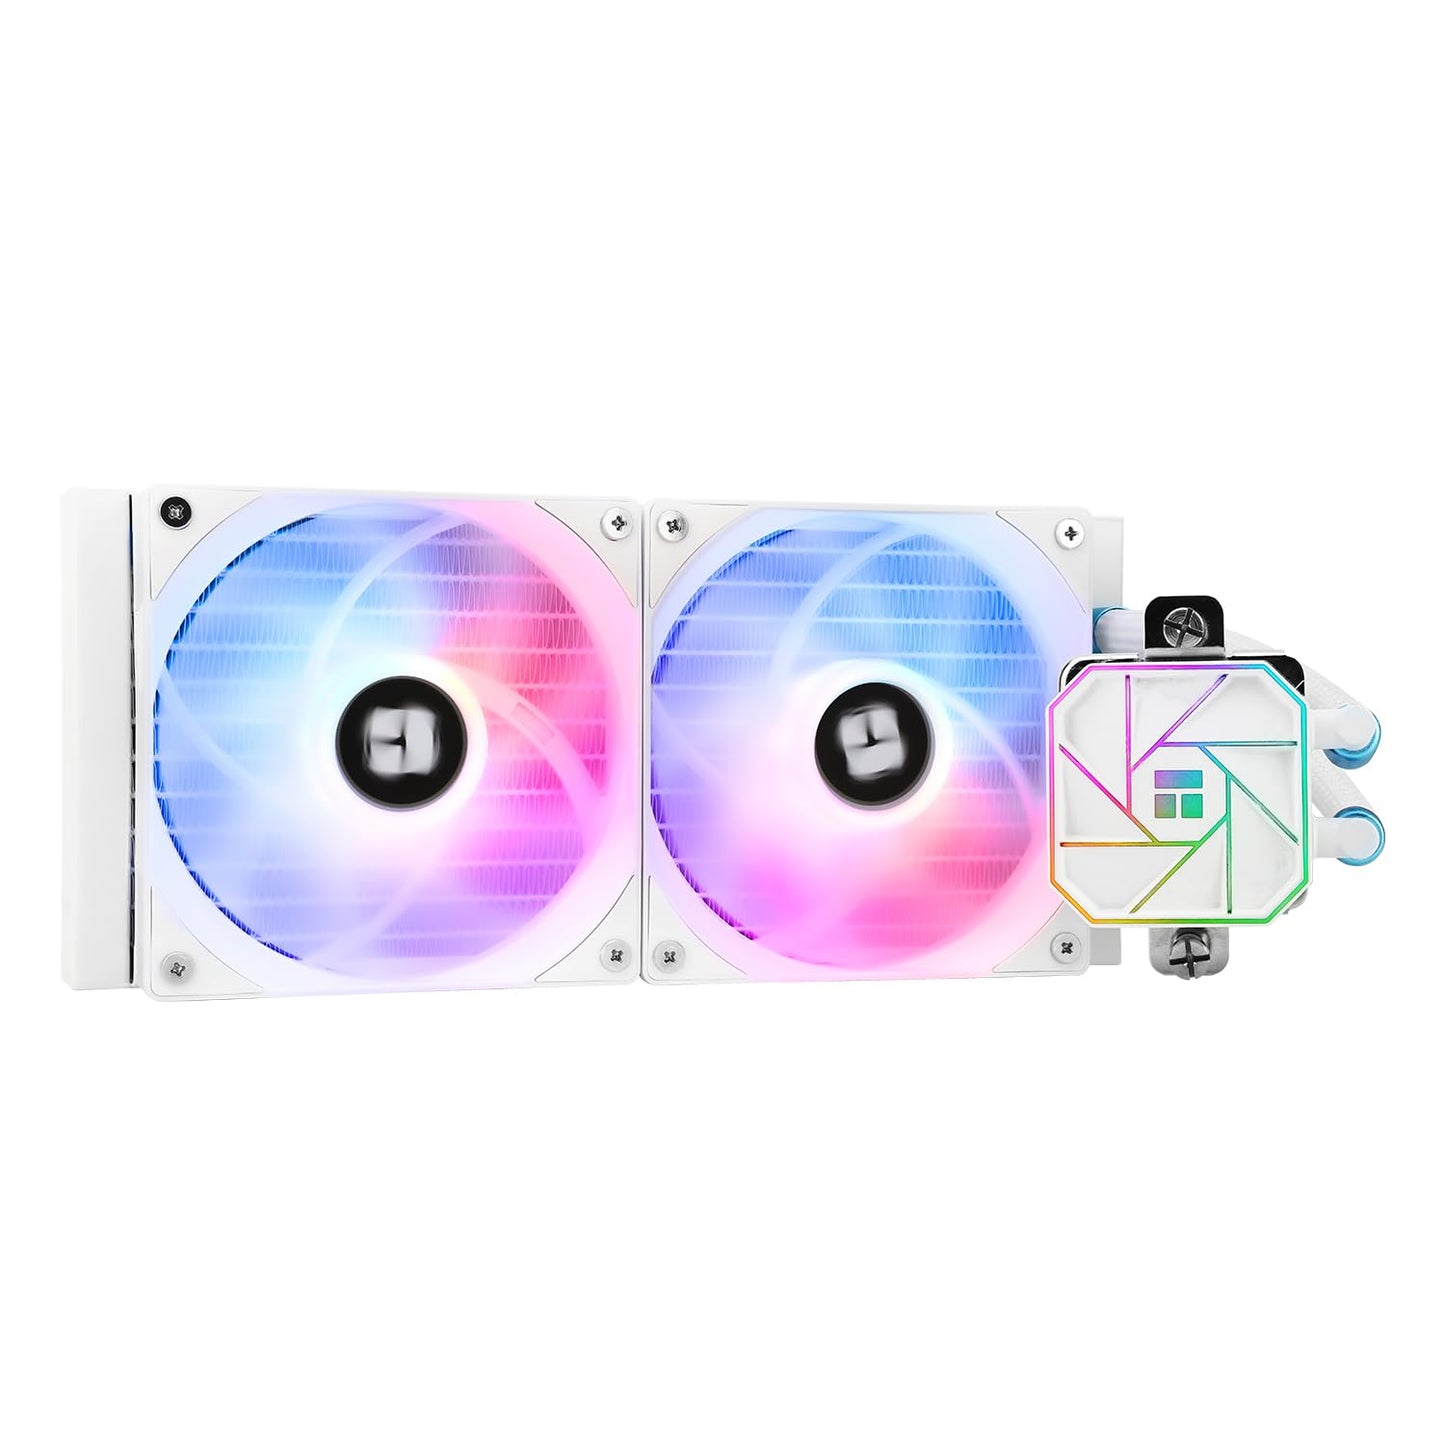 Thermalright Aqua Elite 240 White V3 Water Cooling CPU Cooler, Double PWM ARGB Fans with S-FDB Bearings,Efficient PWM Controlled Pump,for AMD/AM4/AM5, Intel LGA1150/1151/1200/2011/1700